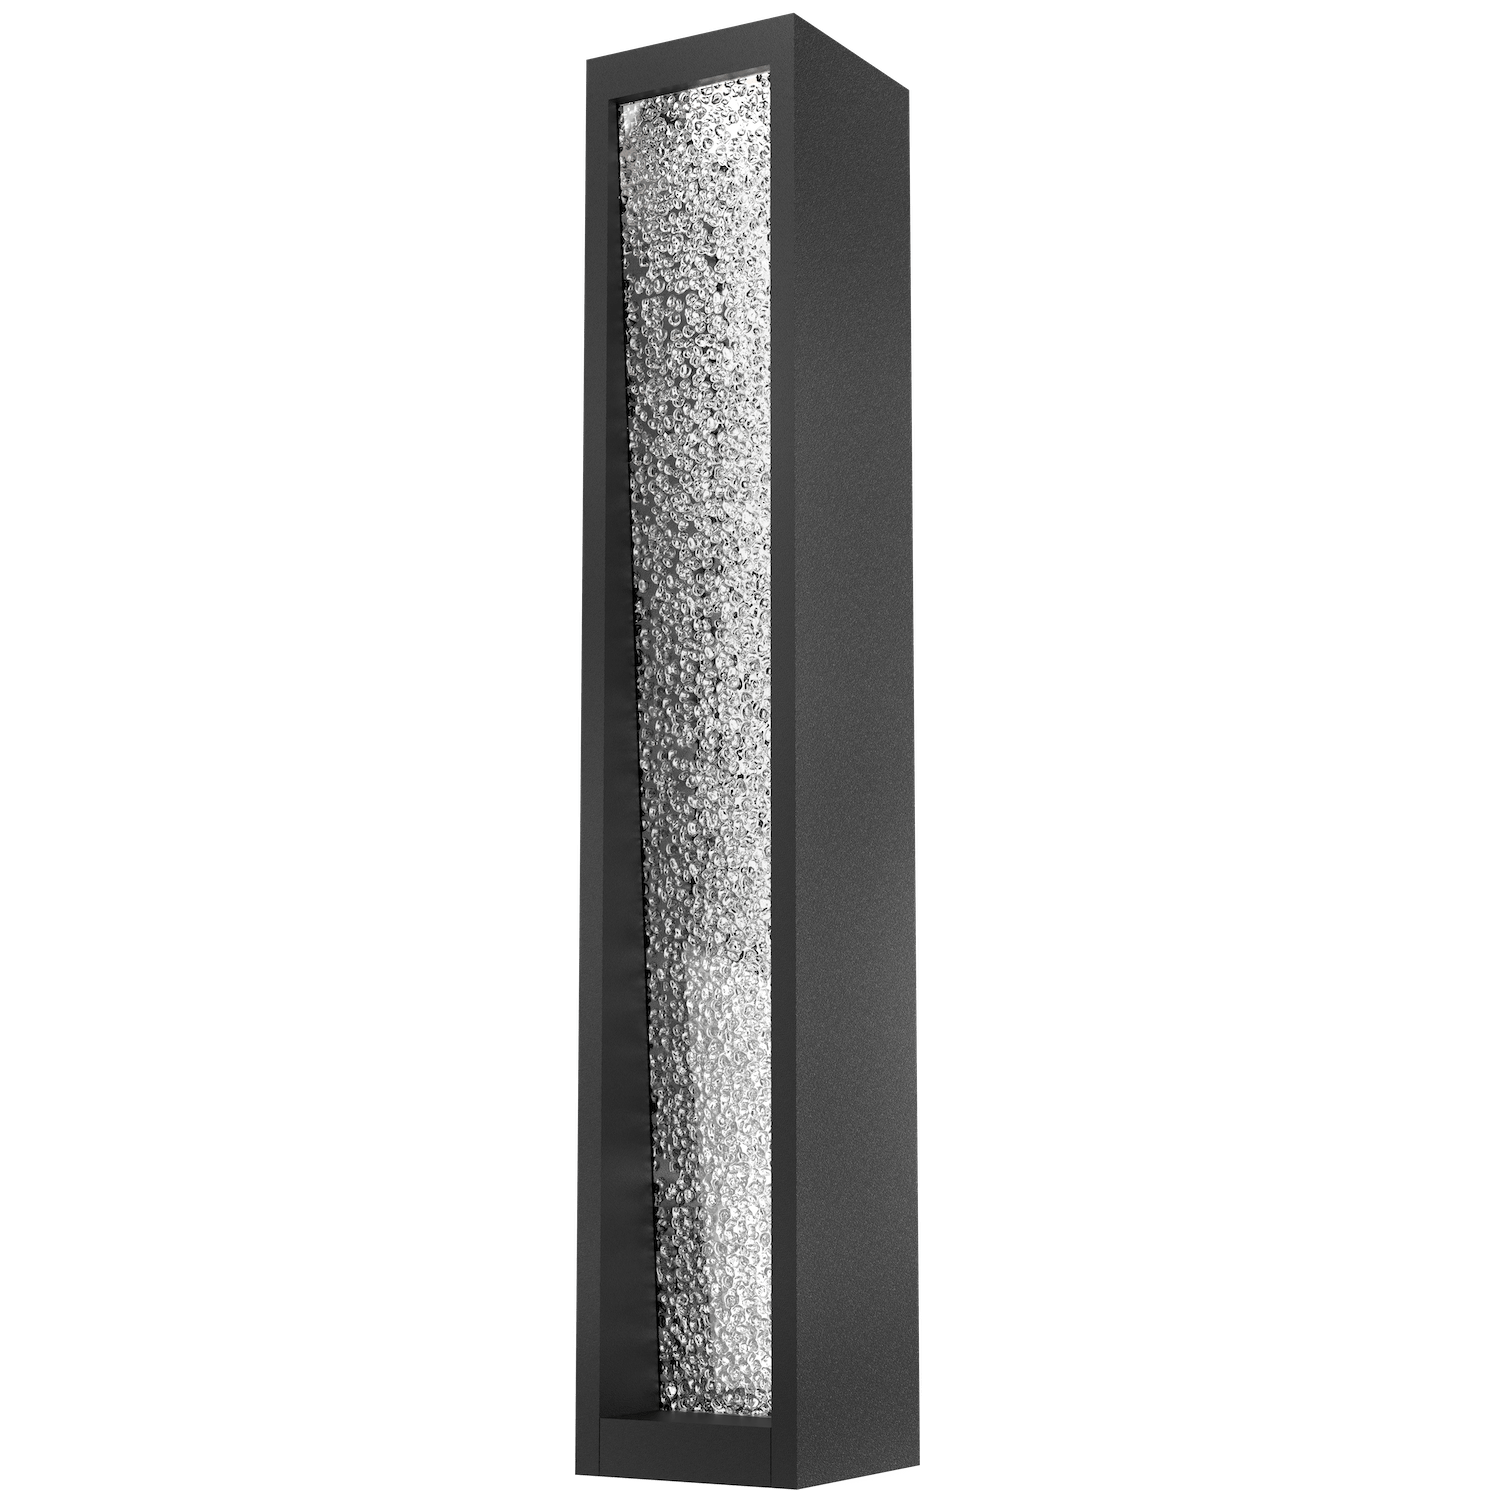 ODB0082-02-TB-CR-Hammerton-Studio-Torrent-26-inch-outdoor-sconce-with-textured-black-finish-and-crackled-rimelight-glass-shade-and-LED-lamping